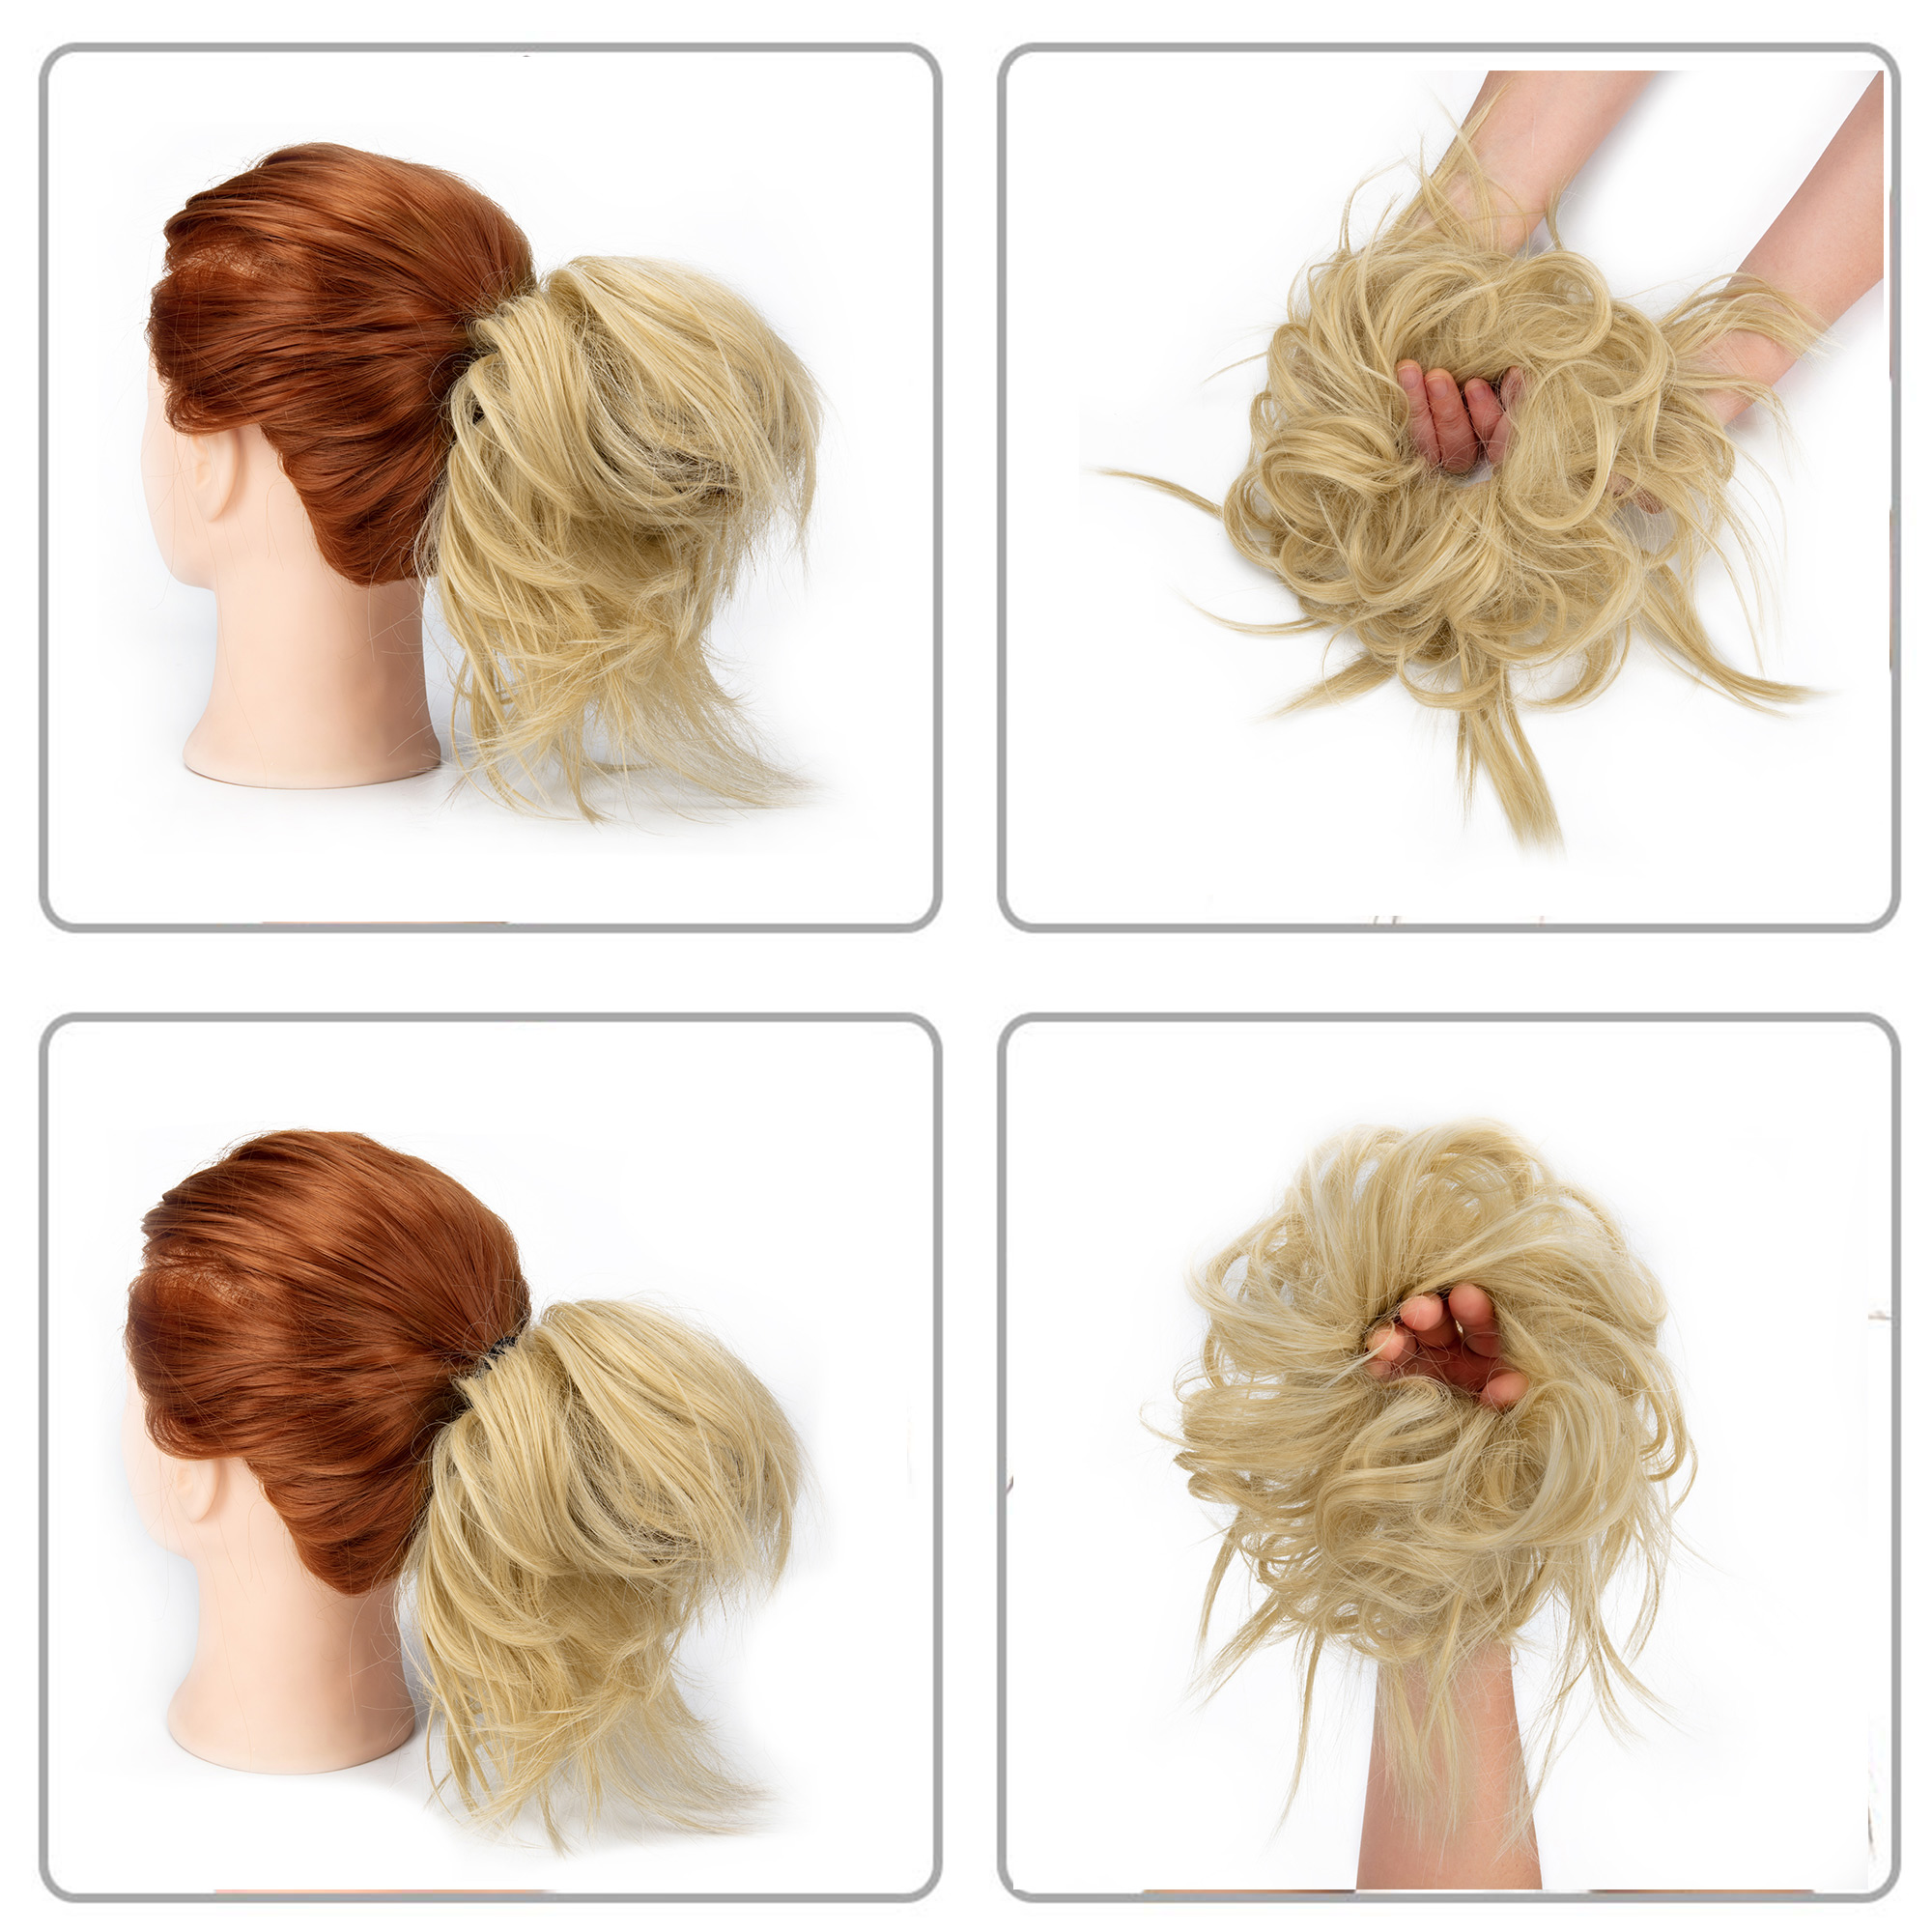 SAYFUT Curly Messy Hair Bun Extension Ponytail Hairpiece-Synthetic Chignon Hairpiece Wrap Messy Hair Bun Donut Hair Chignons Hair Piece for women ( 12 Colors,44g) - image 2 of 7